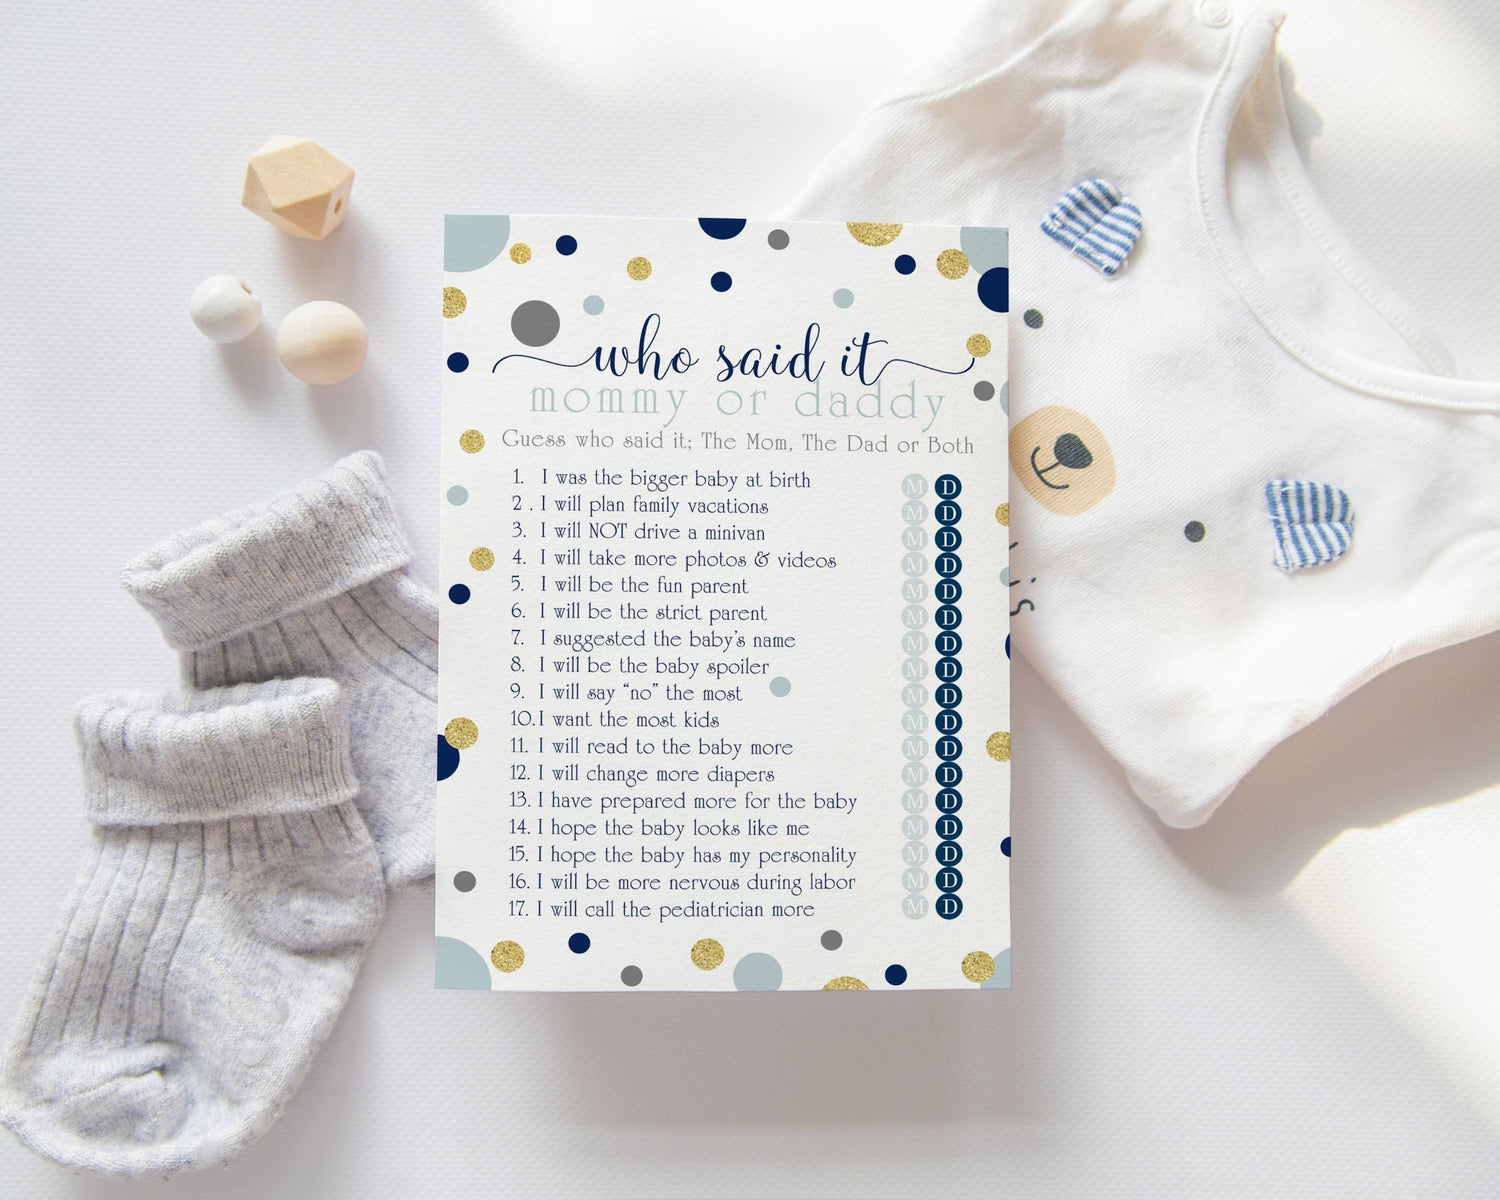 Sail into a chic celebration with our navy blue and gold baby shower theme, featuring modern abstract dots. Discover elegant invitations, heartfelt thank you cards, and playful games to make your event a sophisticated affair.